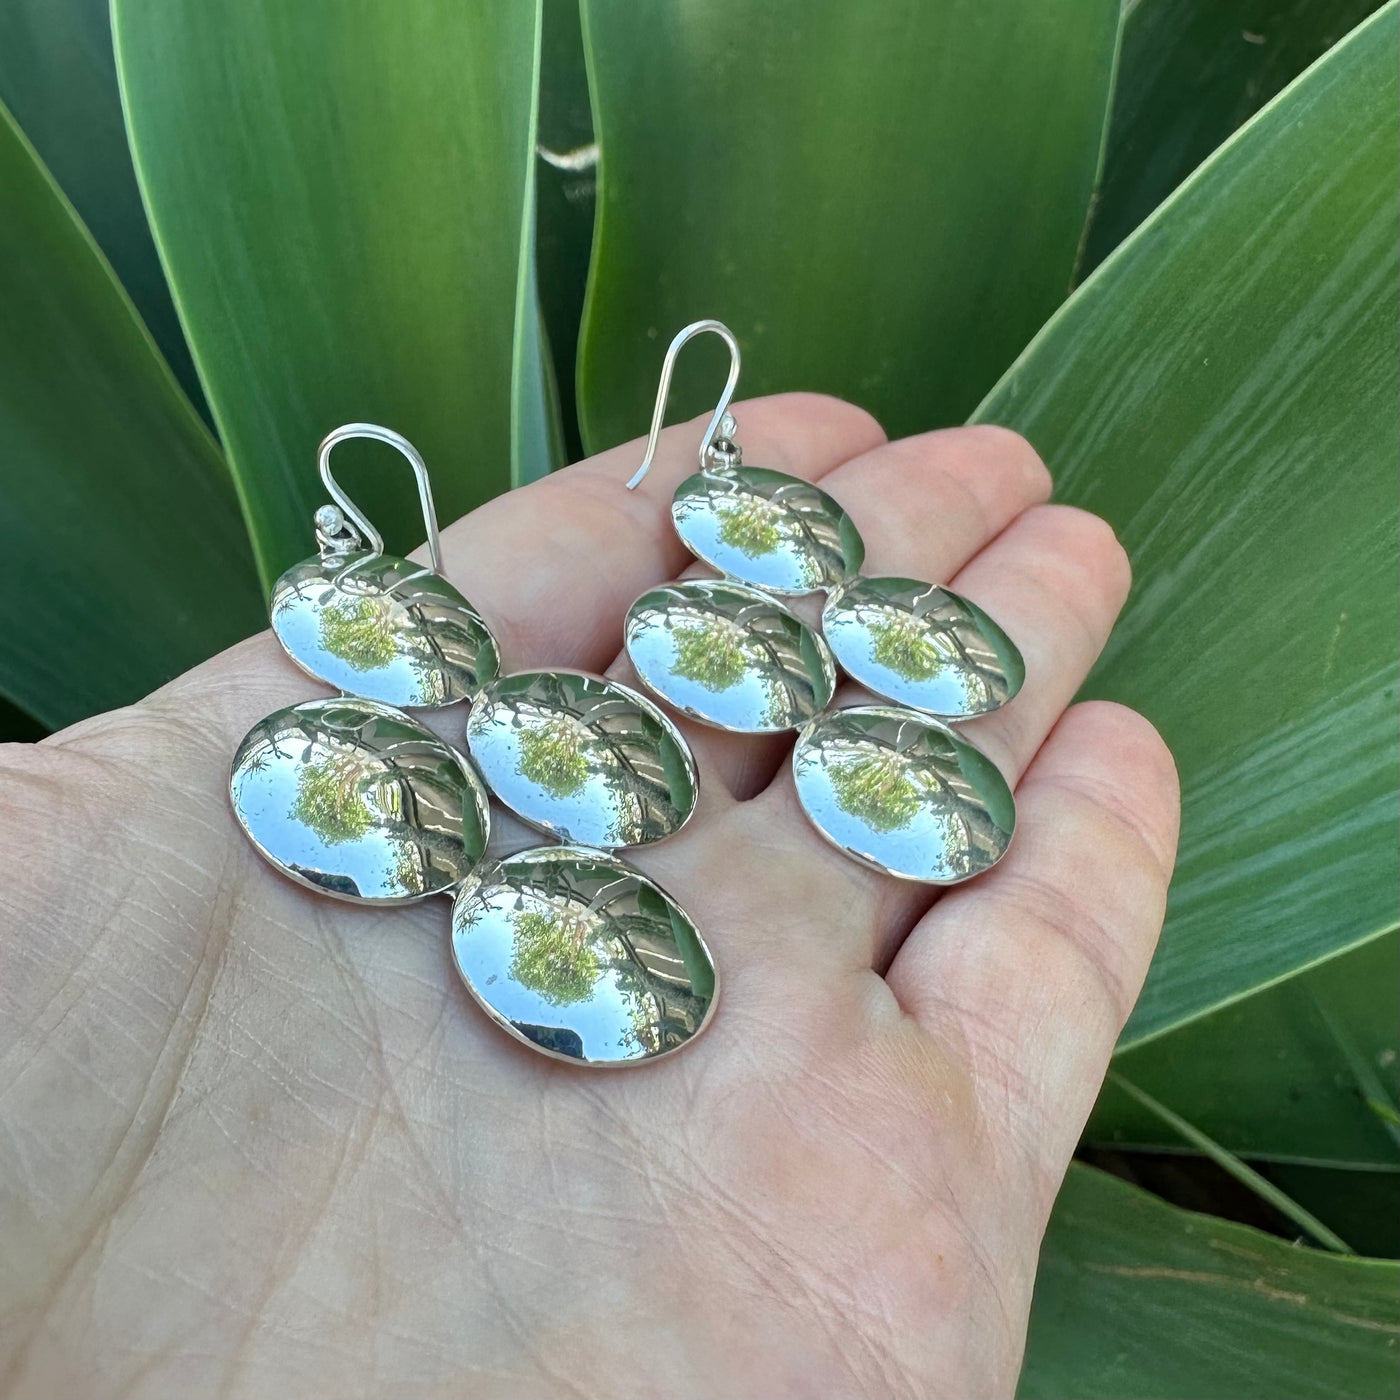 Cuatro Vientos Hand Made Sterling Silver Dangle Earrings